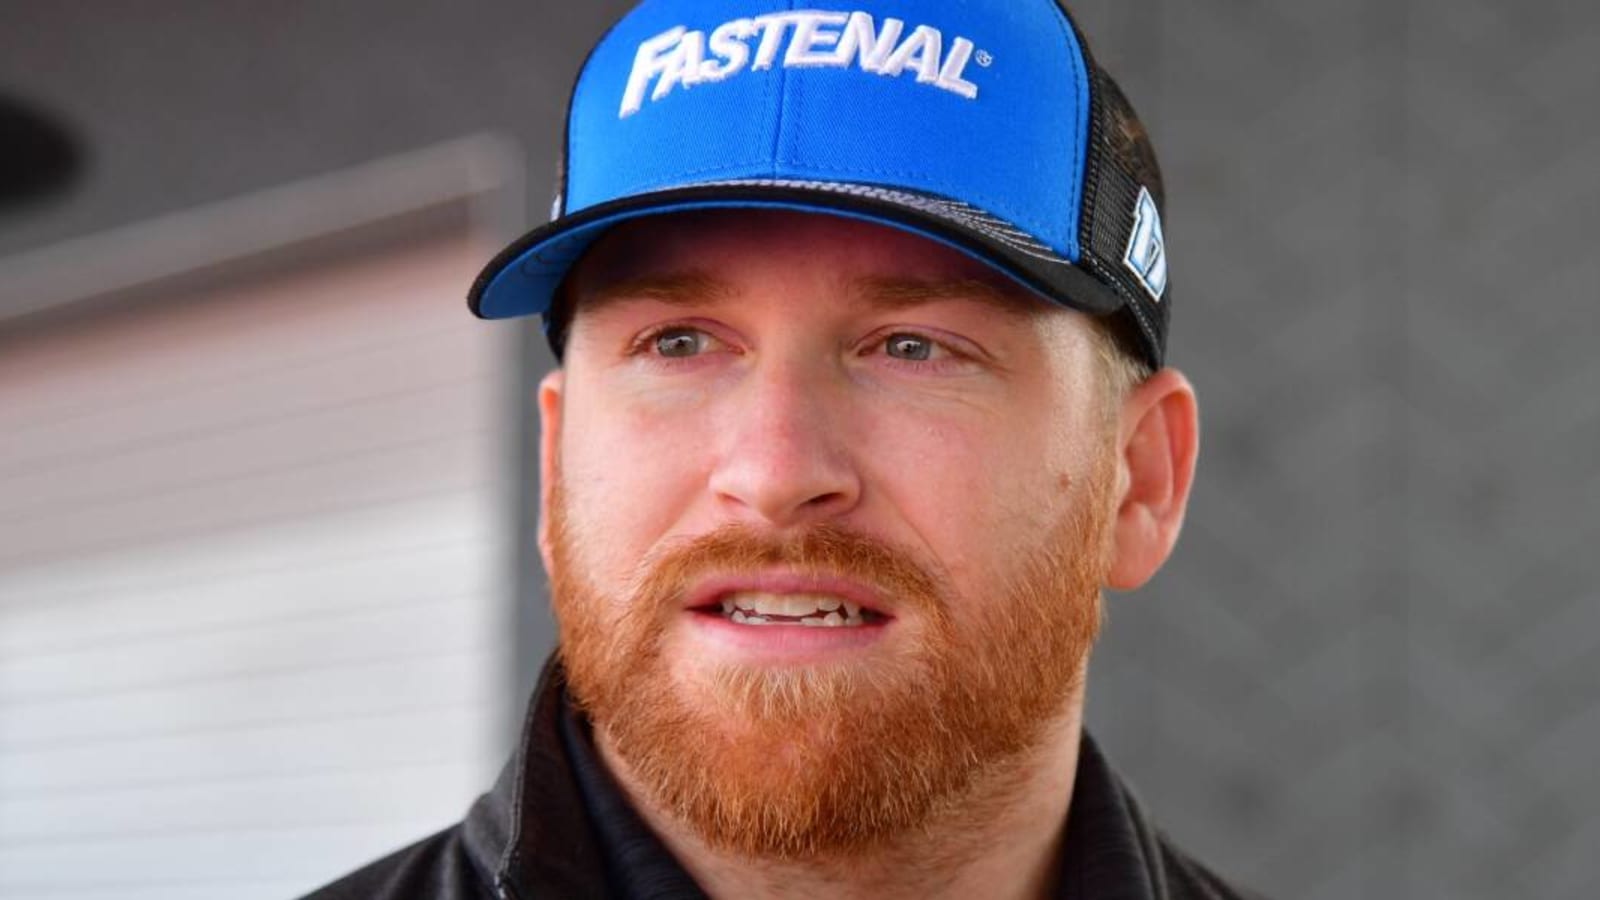 Chris Buescher's crew chief meets with NASCAR officials after photo finish with Kyle Larson, accepts race outcome